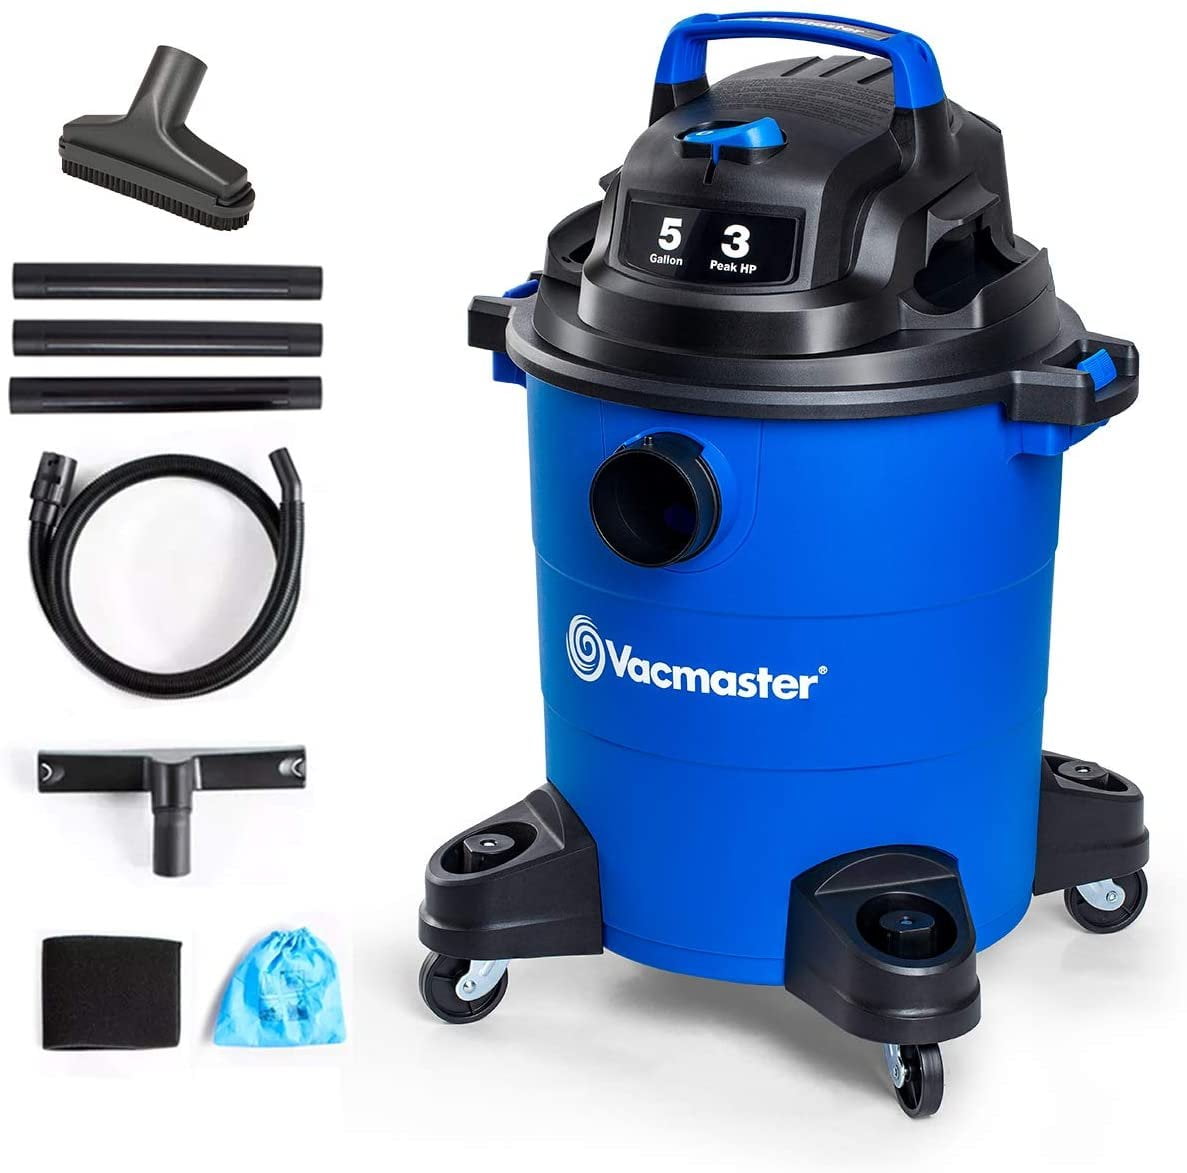 Vacmaster 3 Peak HP 5 Gallon Wet Dry Vacuum Cleaner Lightweight Powerful  Suction Shop Vacs with Blower Function for Dog Hair,Garage,Car,Home 